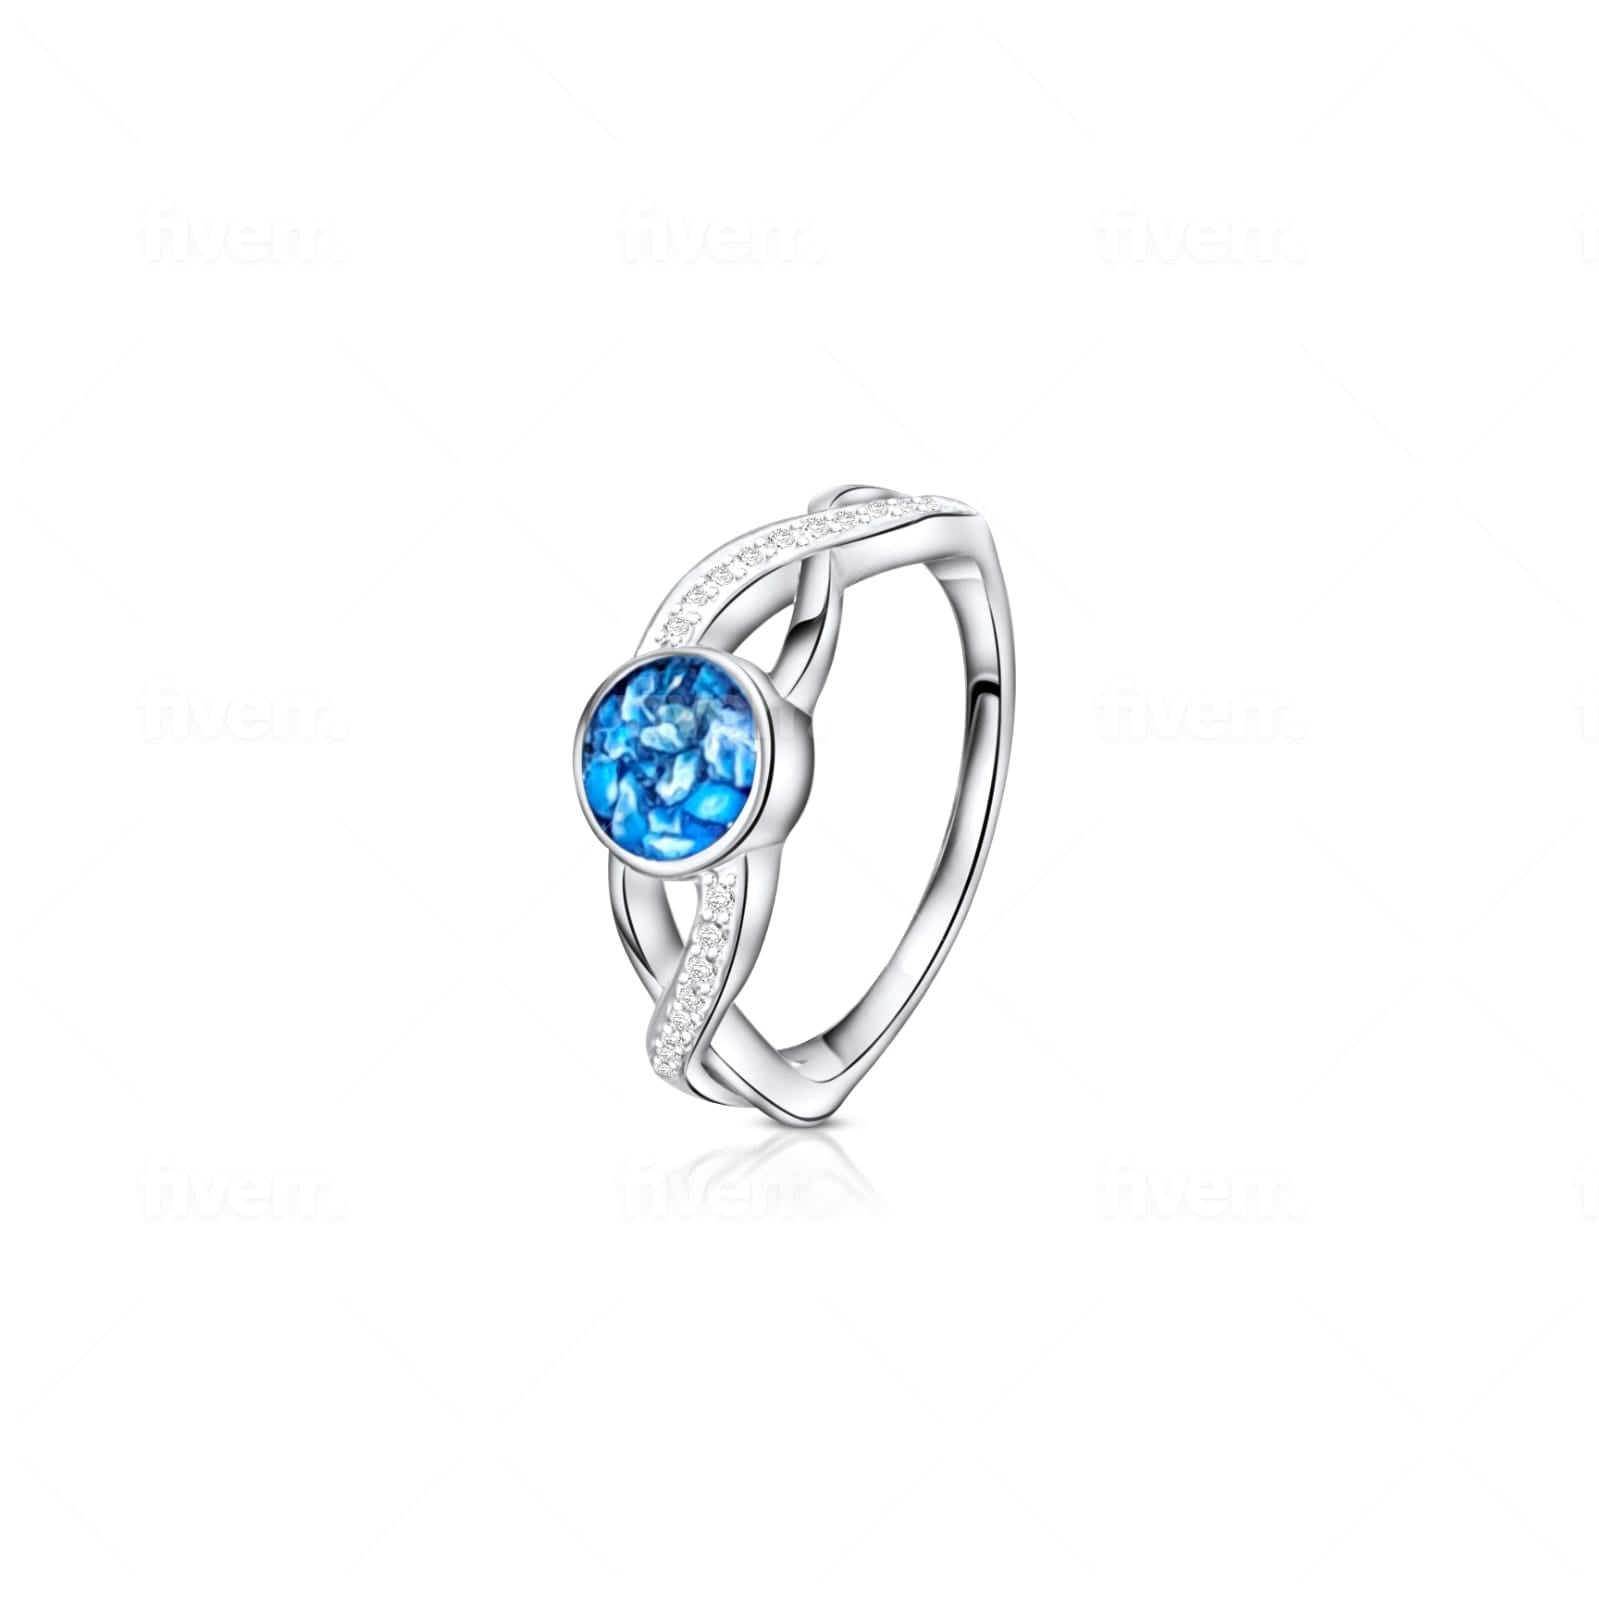 SK - Unique Crystal round - 925 sterling silver ashes ring - 10-12 weeks.